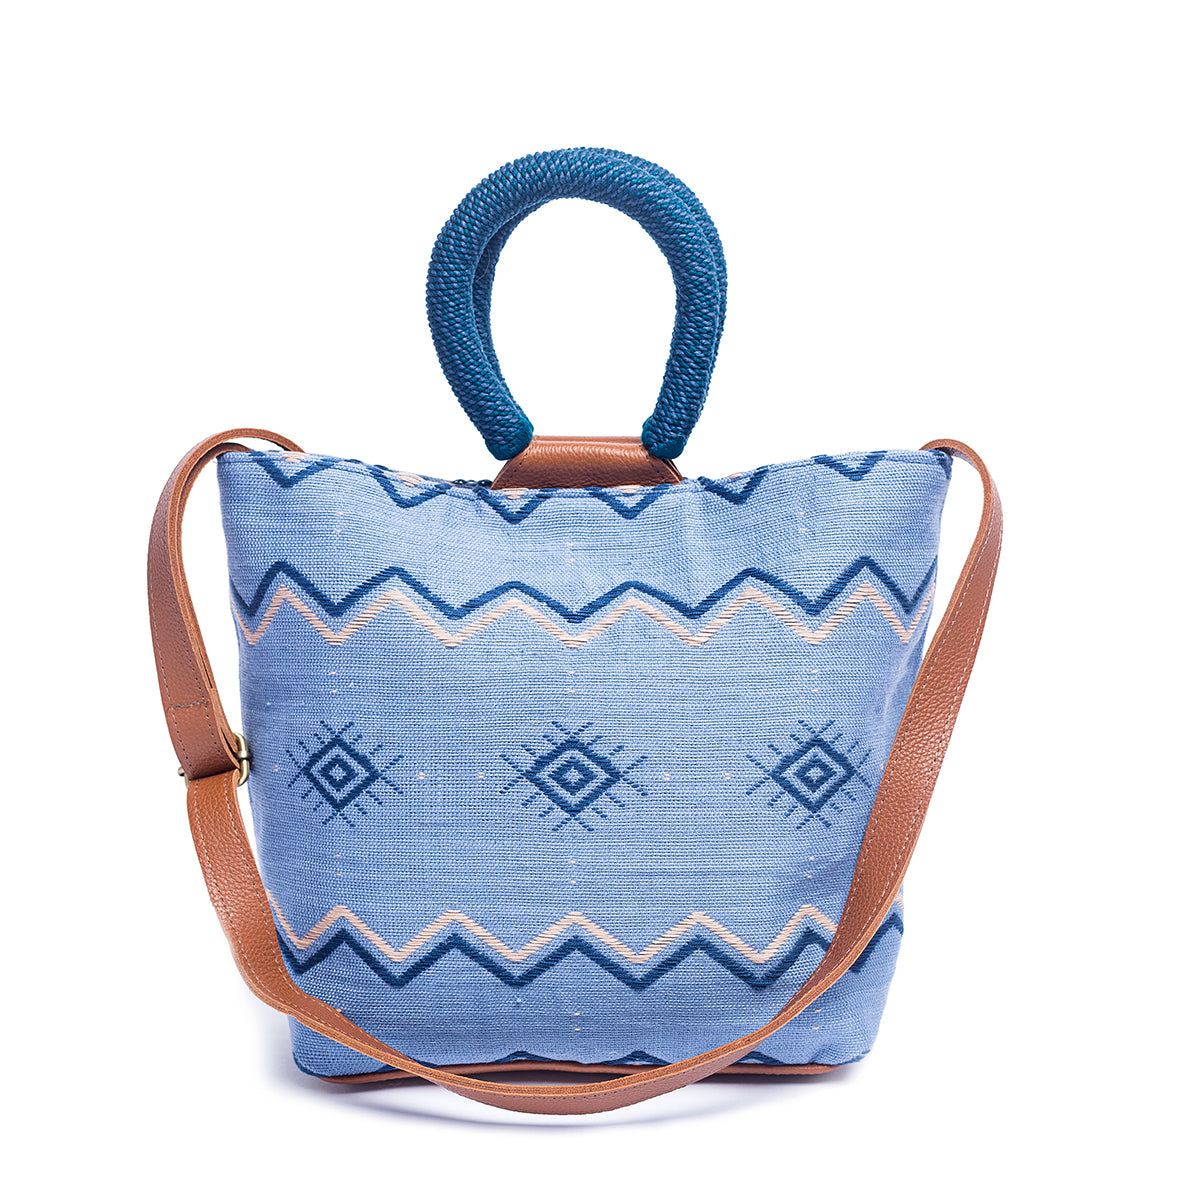 Front of the artisan Dalila Midi Handwoven Mountain Blue Tote. The tote has a bucket shape with rounded handles coiled in blue thread. The pattern has horizontal zigzag stripes and a diamond shape pattern in the middle section. The colors are light blue, dark blue, and white. It has an adjustable leather strap.